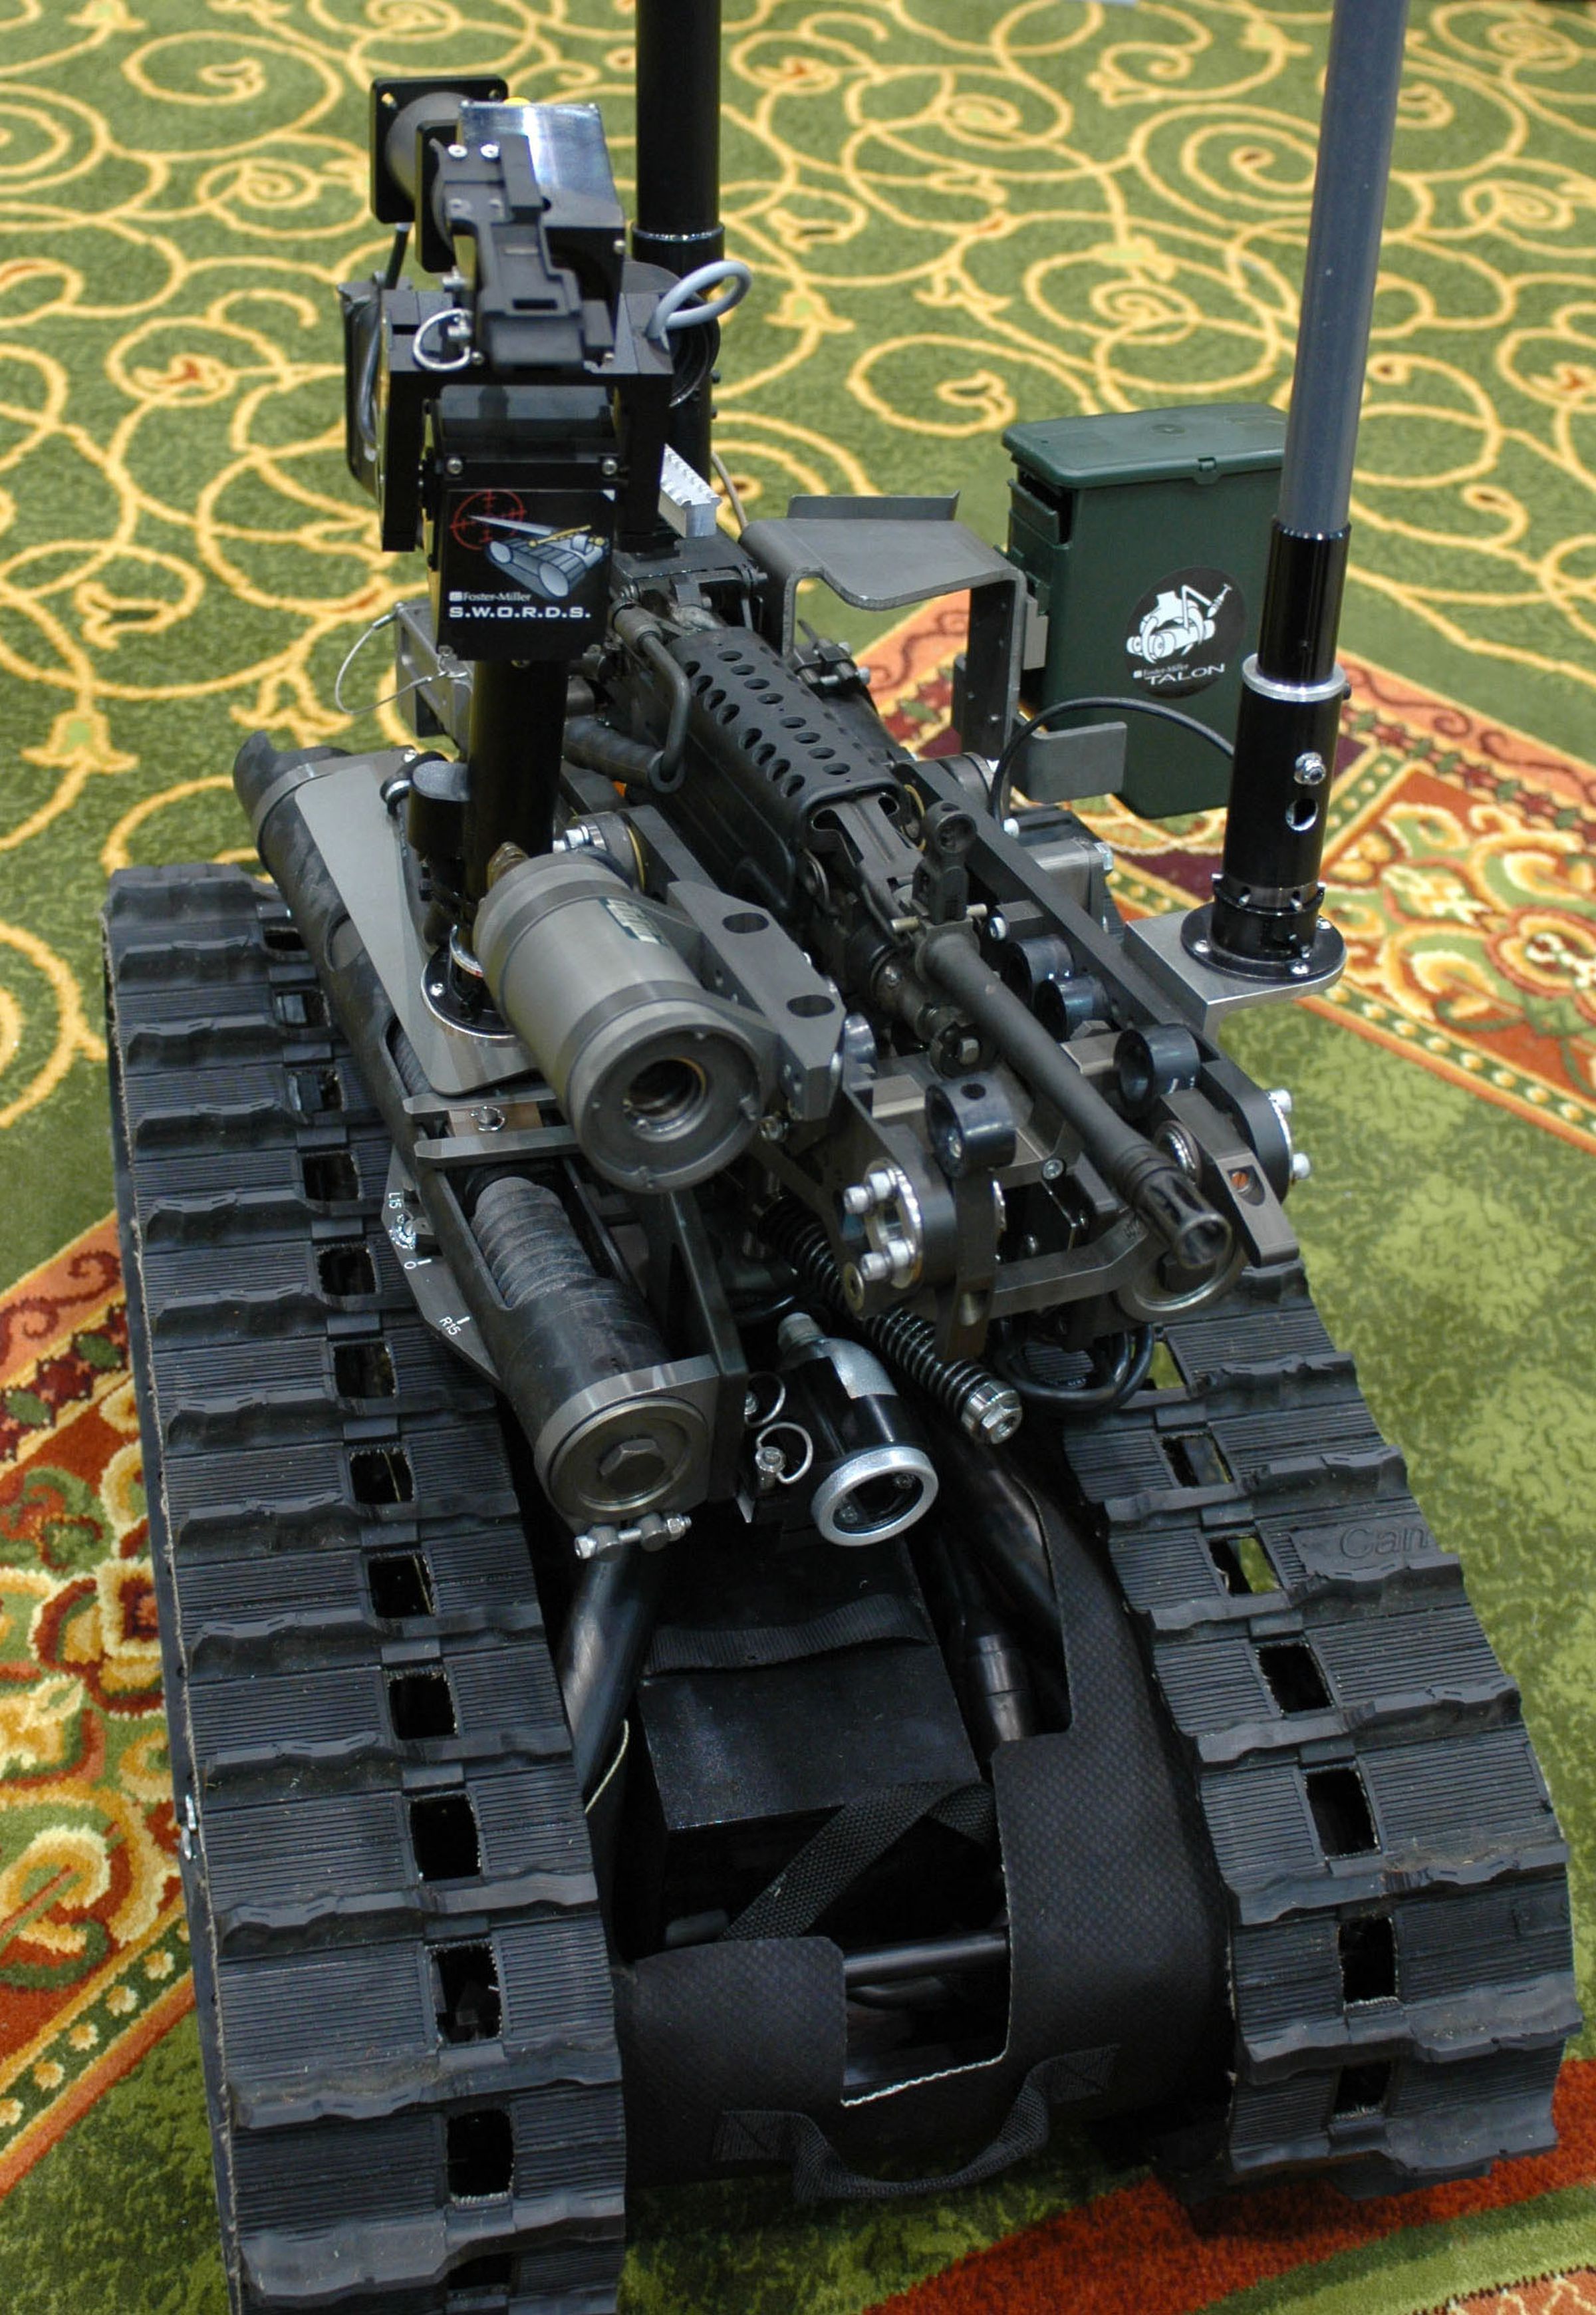 A picture showing a tracked robot the size of a small refrigerator armed with a gun.